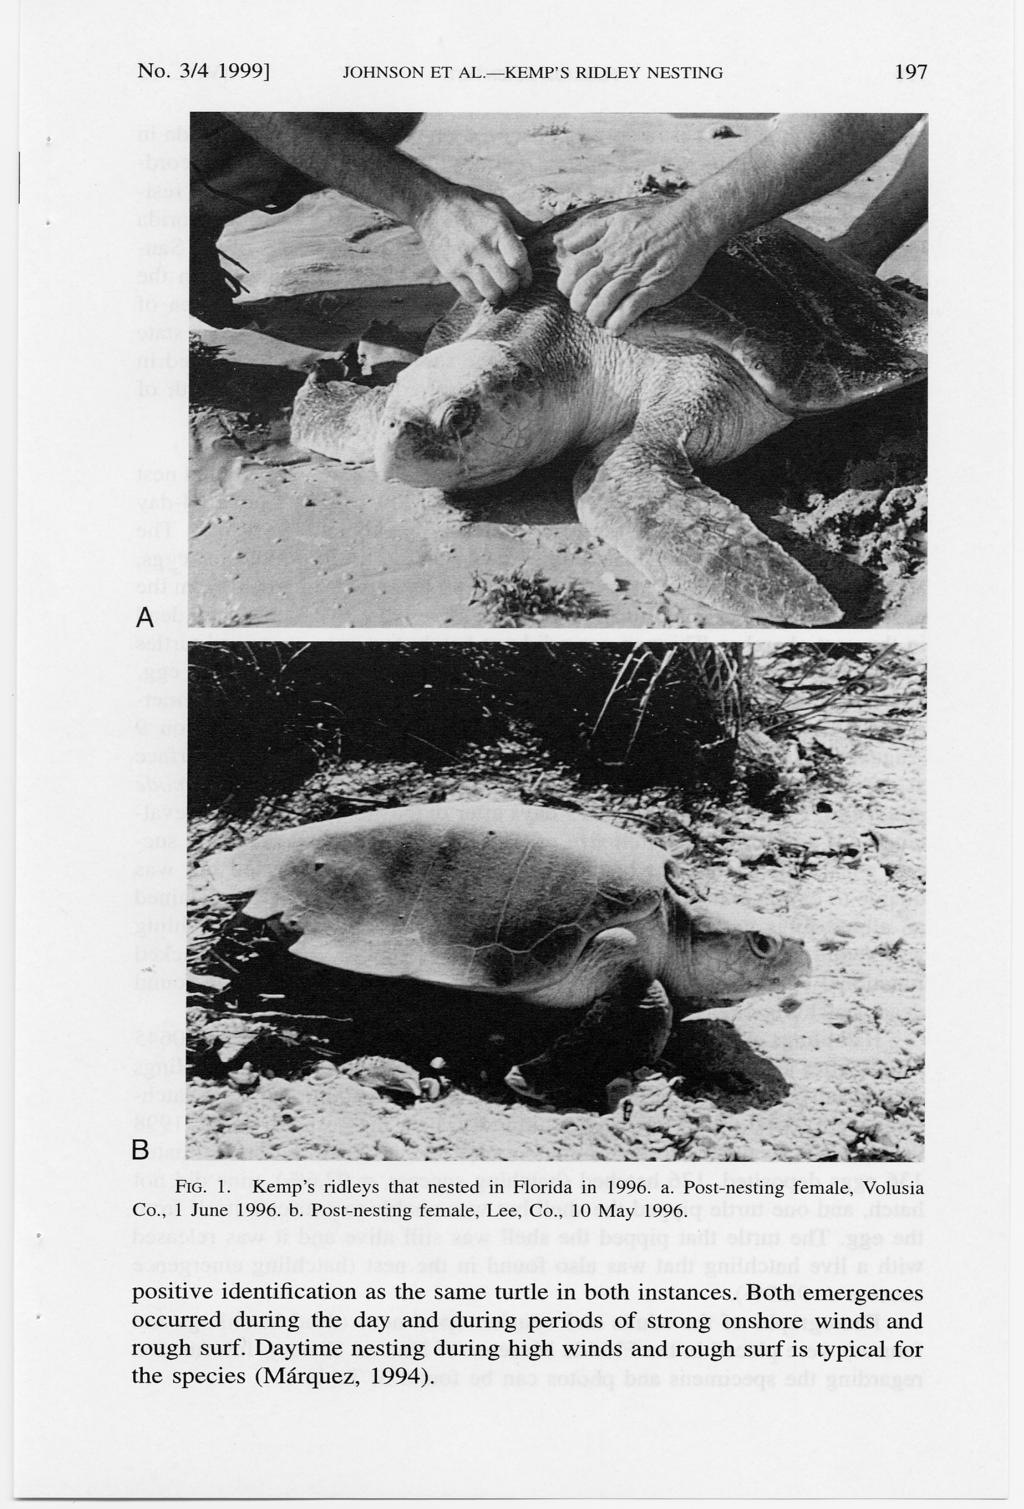 No. 3/4 1999] JOHNSON ET AL.-KEMP'S RIDLEY NESTING 197 A Co., 1 June 1996. b. Post-nesting female, Lee, Co., 10 May 1996. positive identification as the same turtle in both instances.